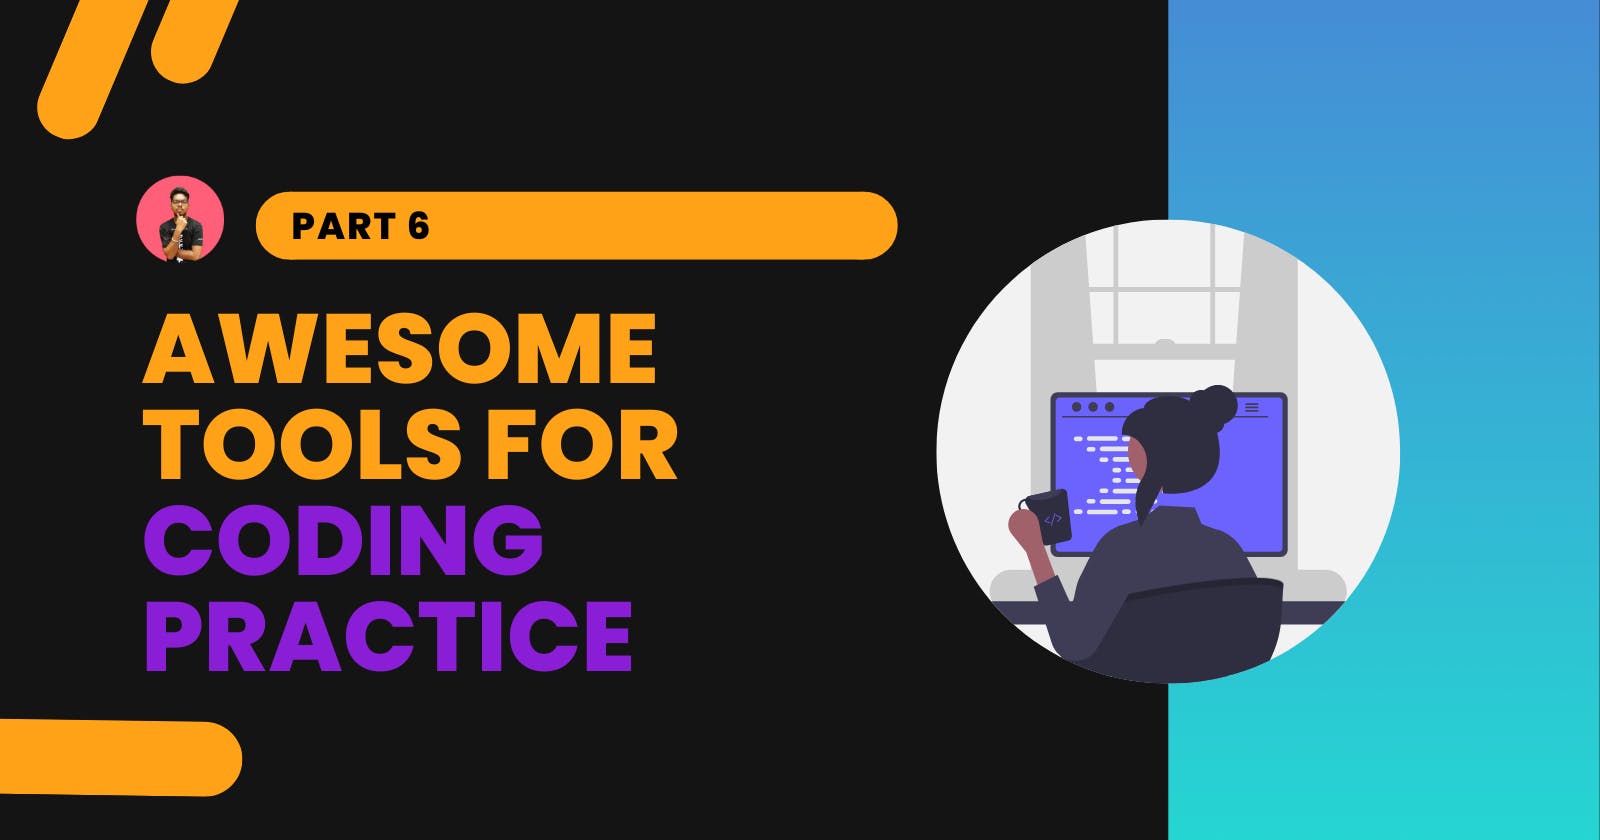 Awesome tools for Coding Practice